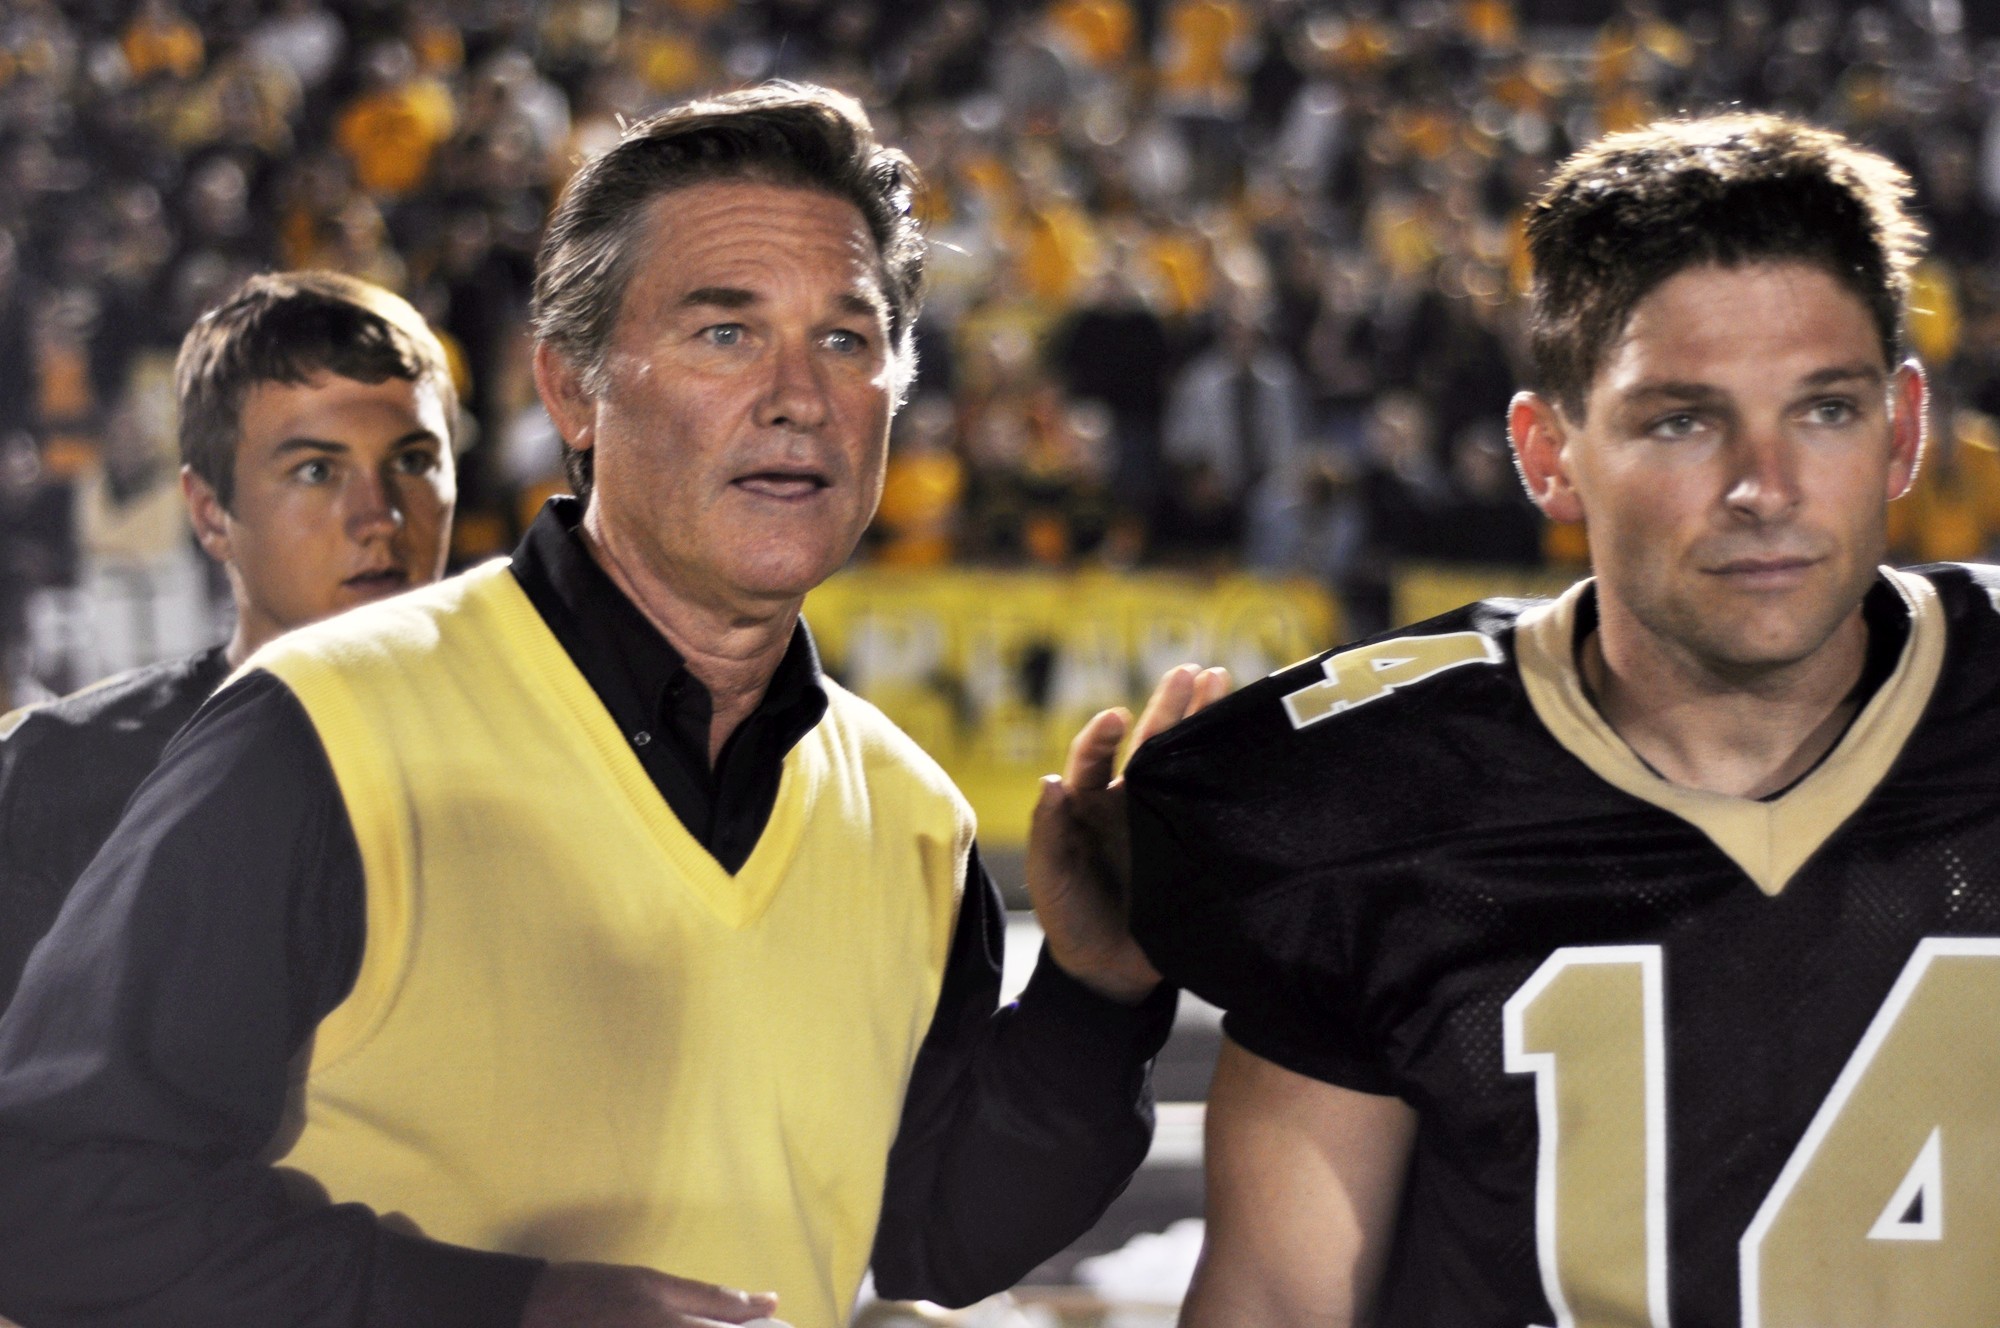 Kurt Russell stars as Coach Hand and Brian Presley stars as Scott Murphy in Anchor Bay Films' Touchback (2012)